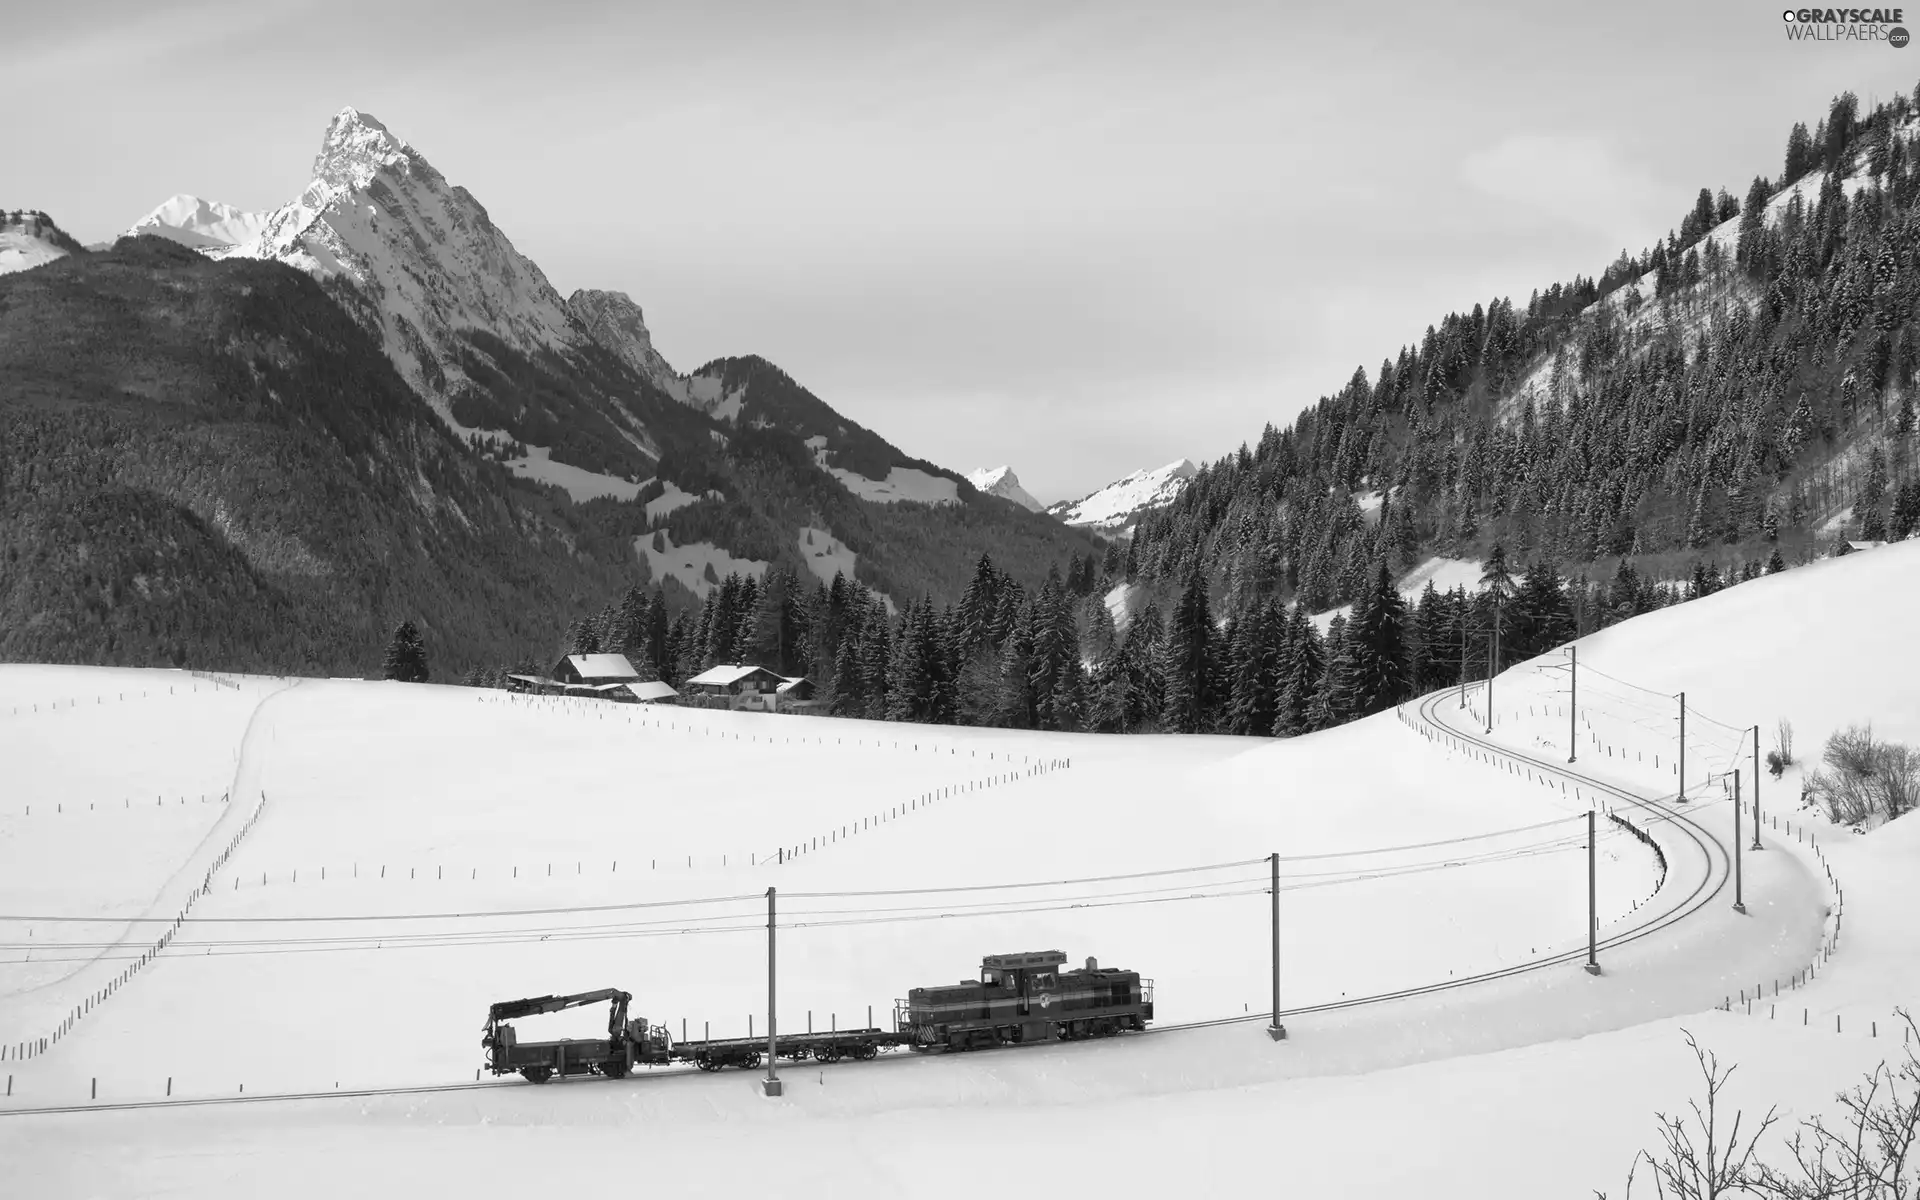 Train, winter, woods, colony, Mountains